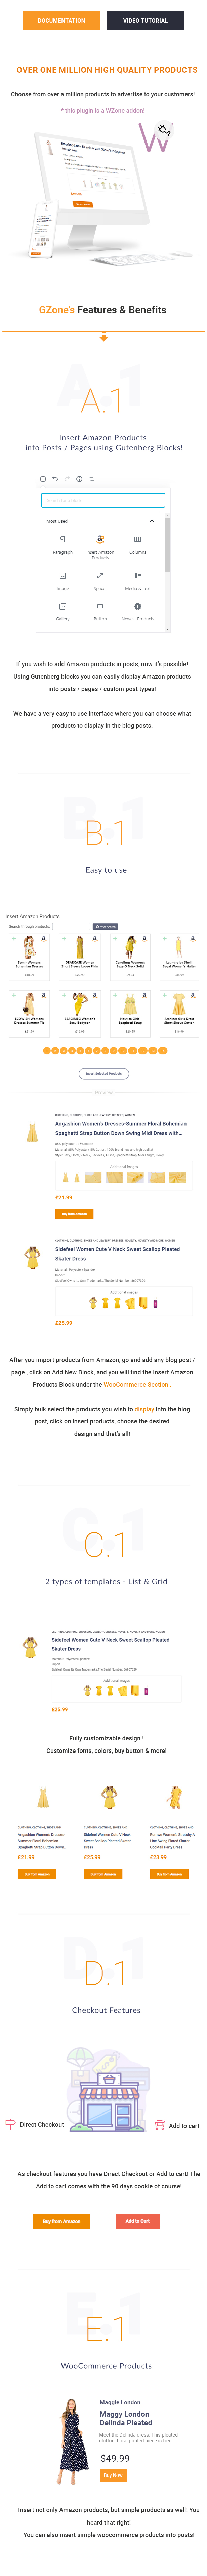 GZone - Insert Amazon / WooCommerce Products into Posts / Pages - 1